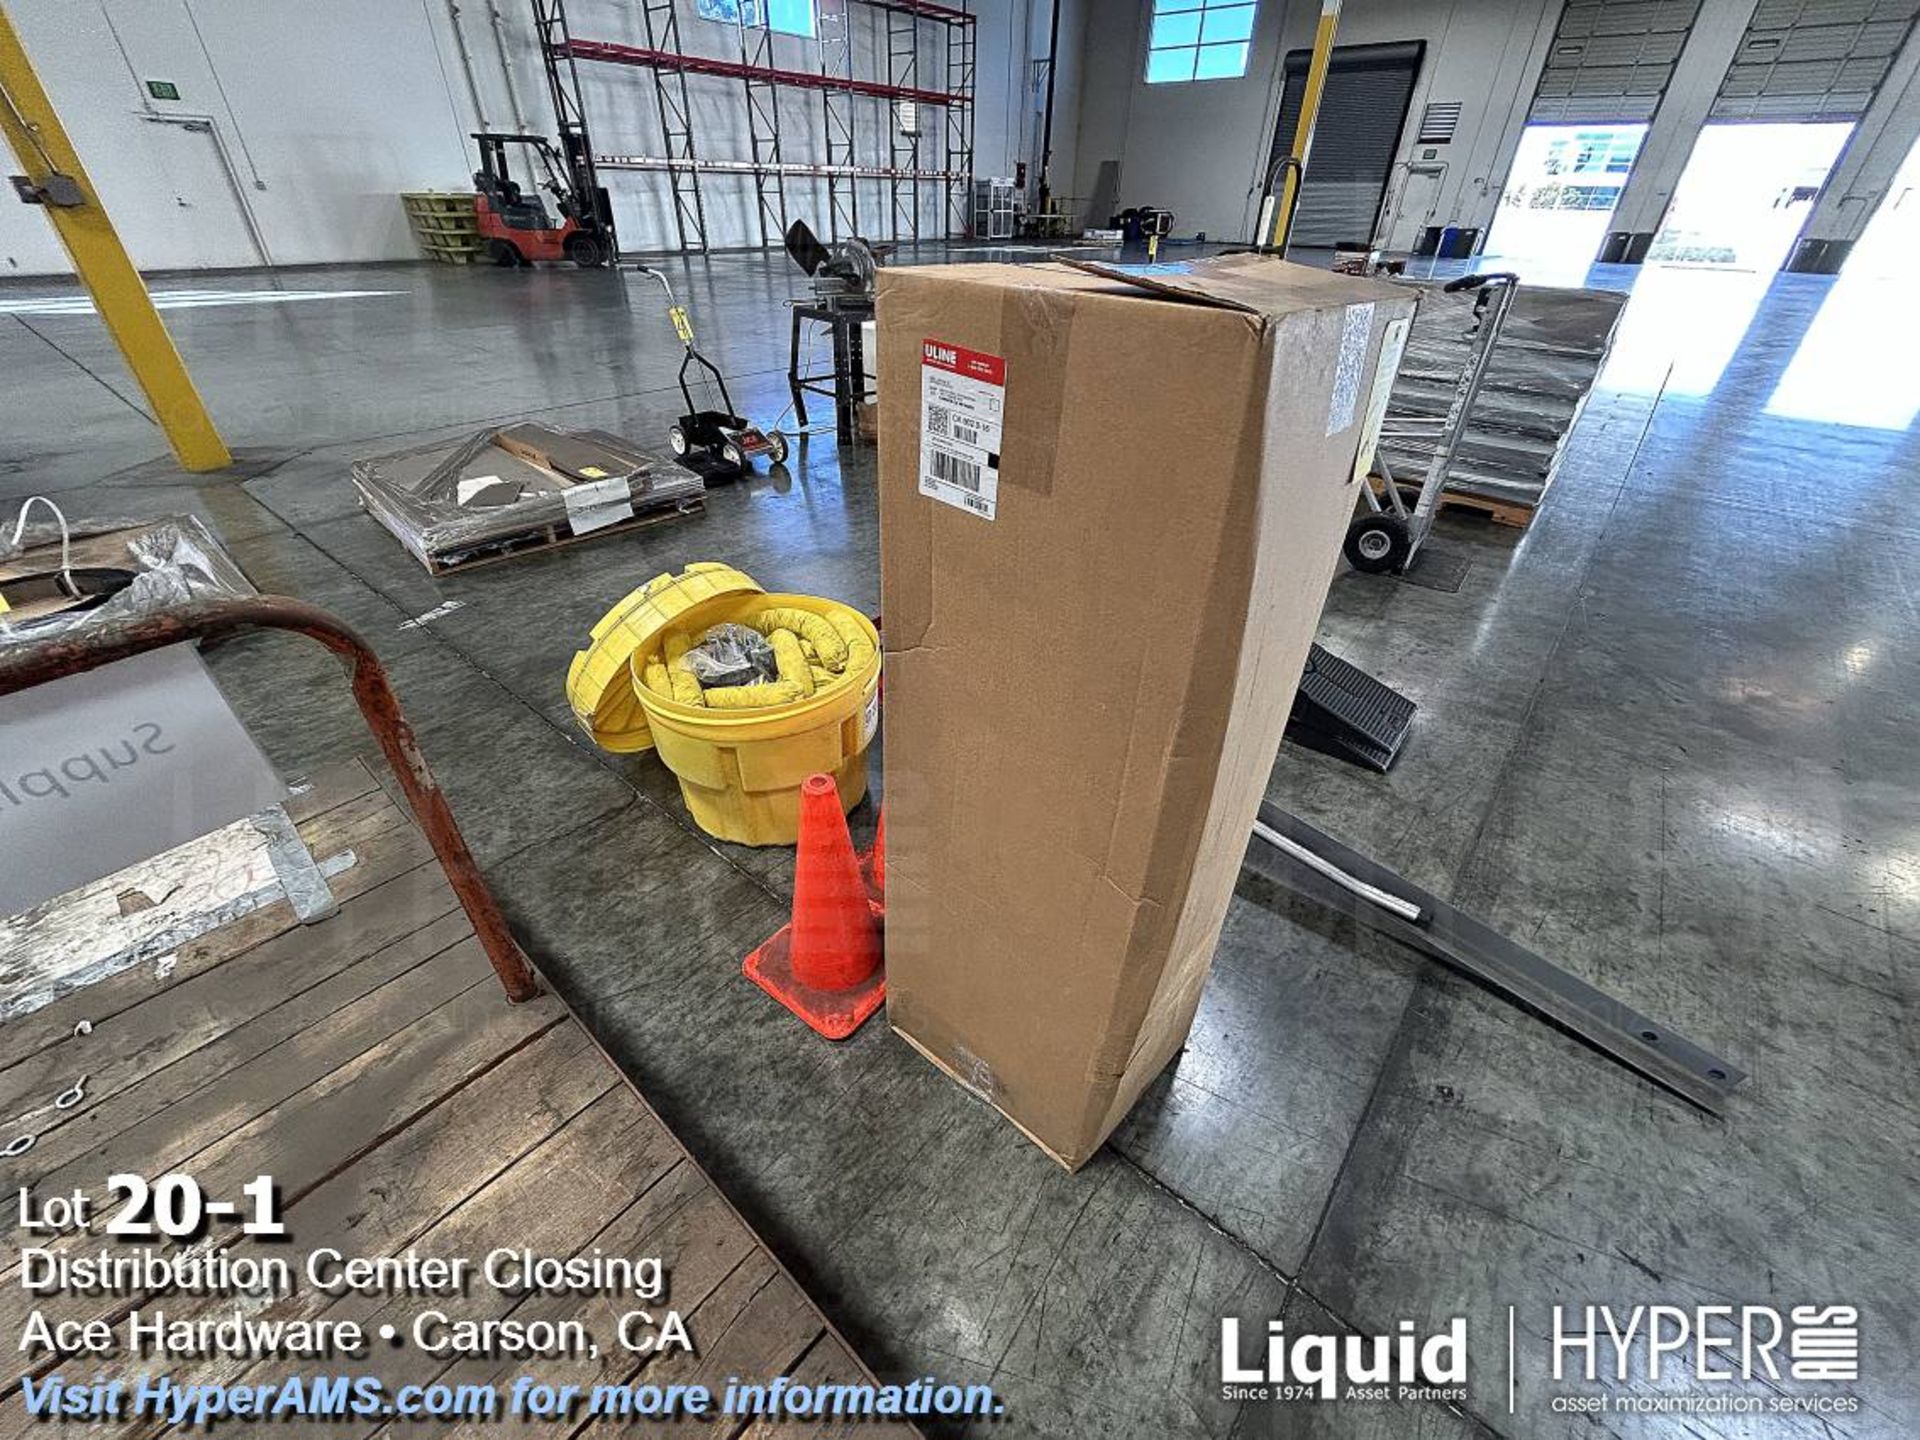 Lot: Safety cones, and spill kit